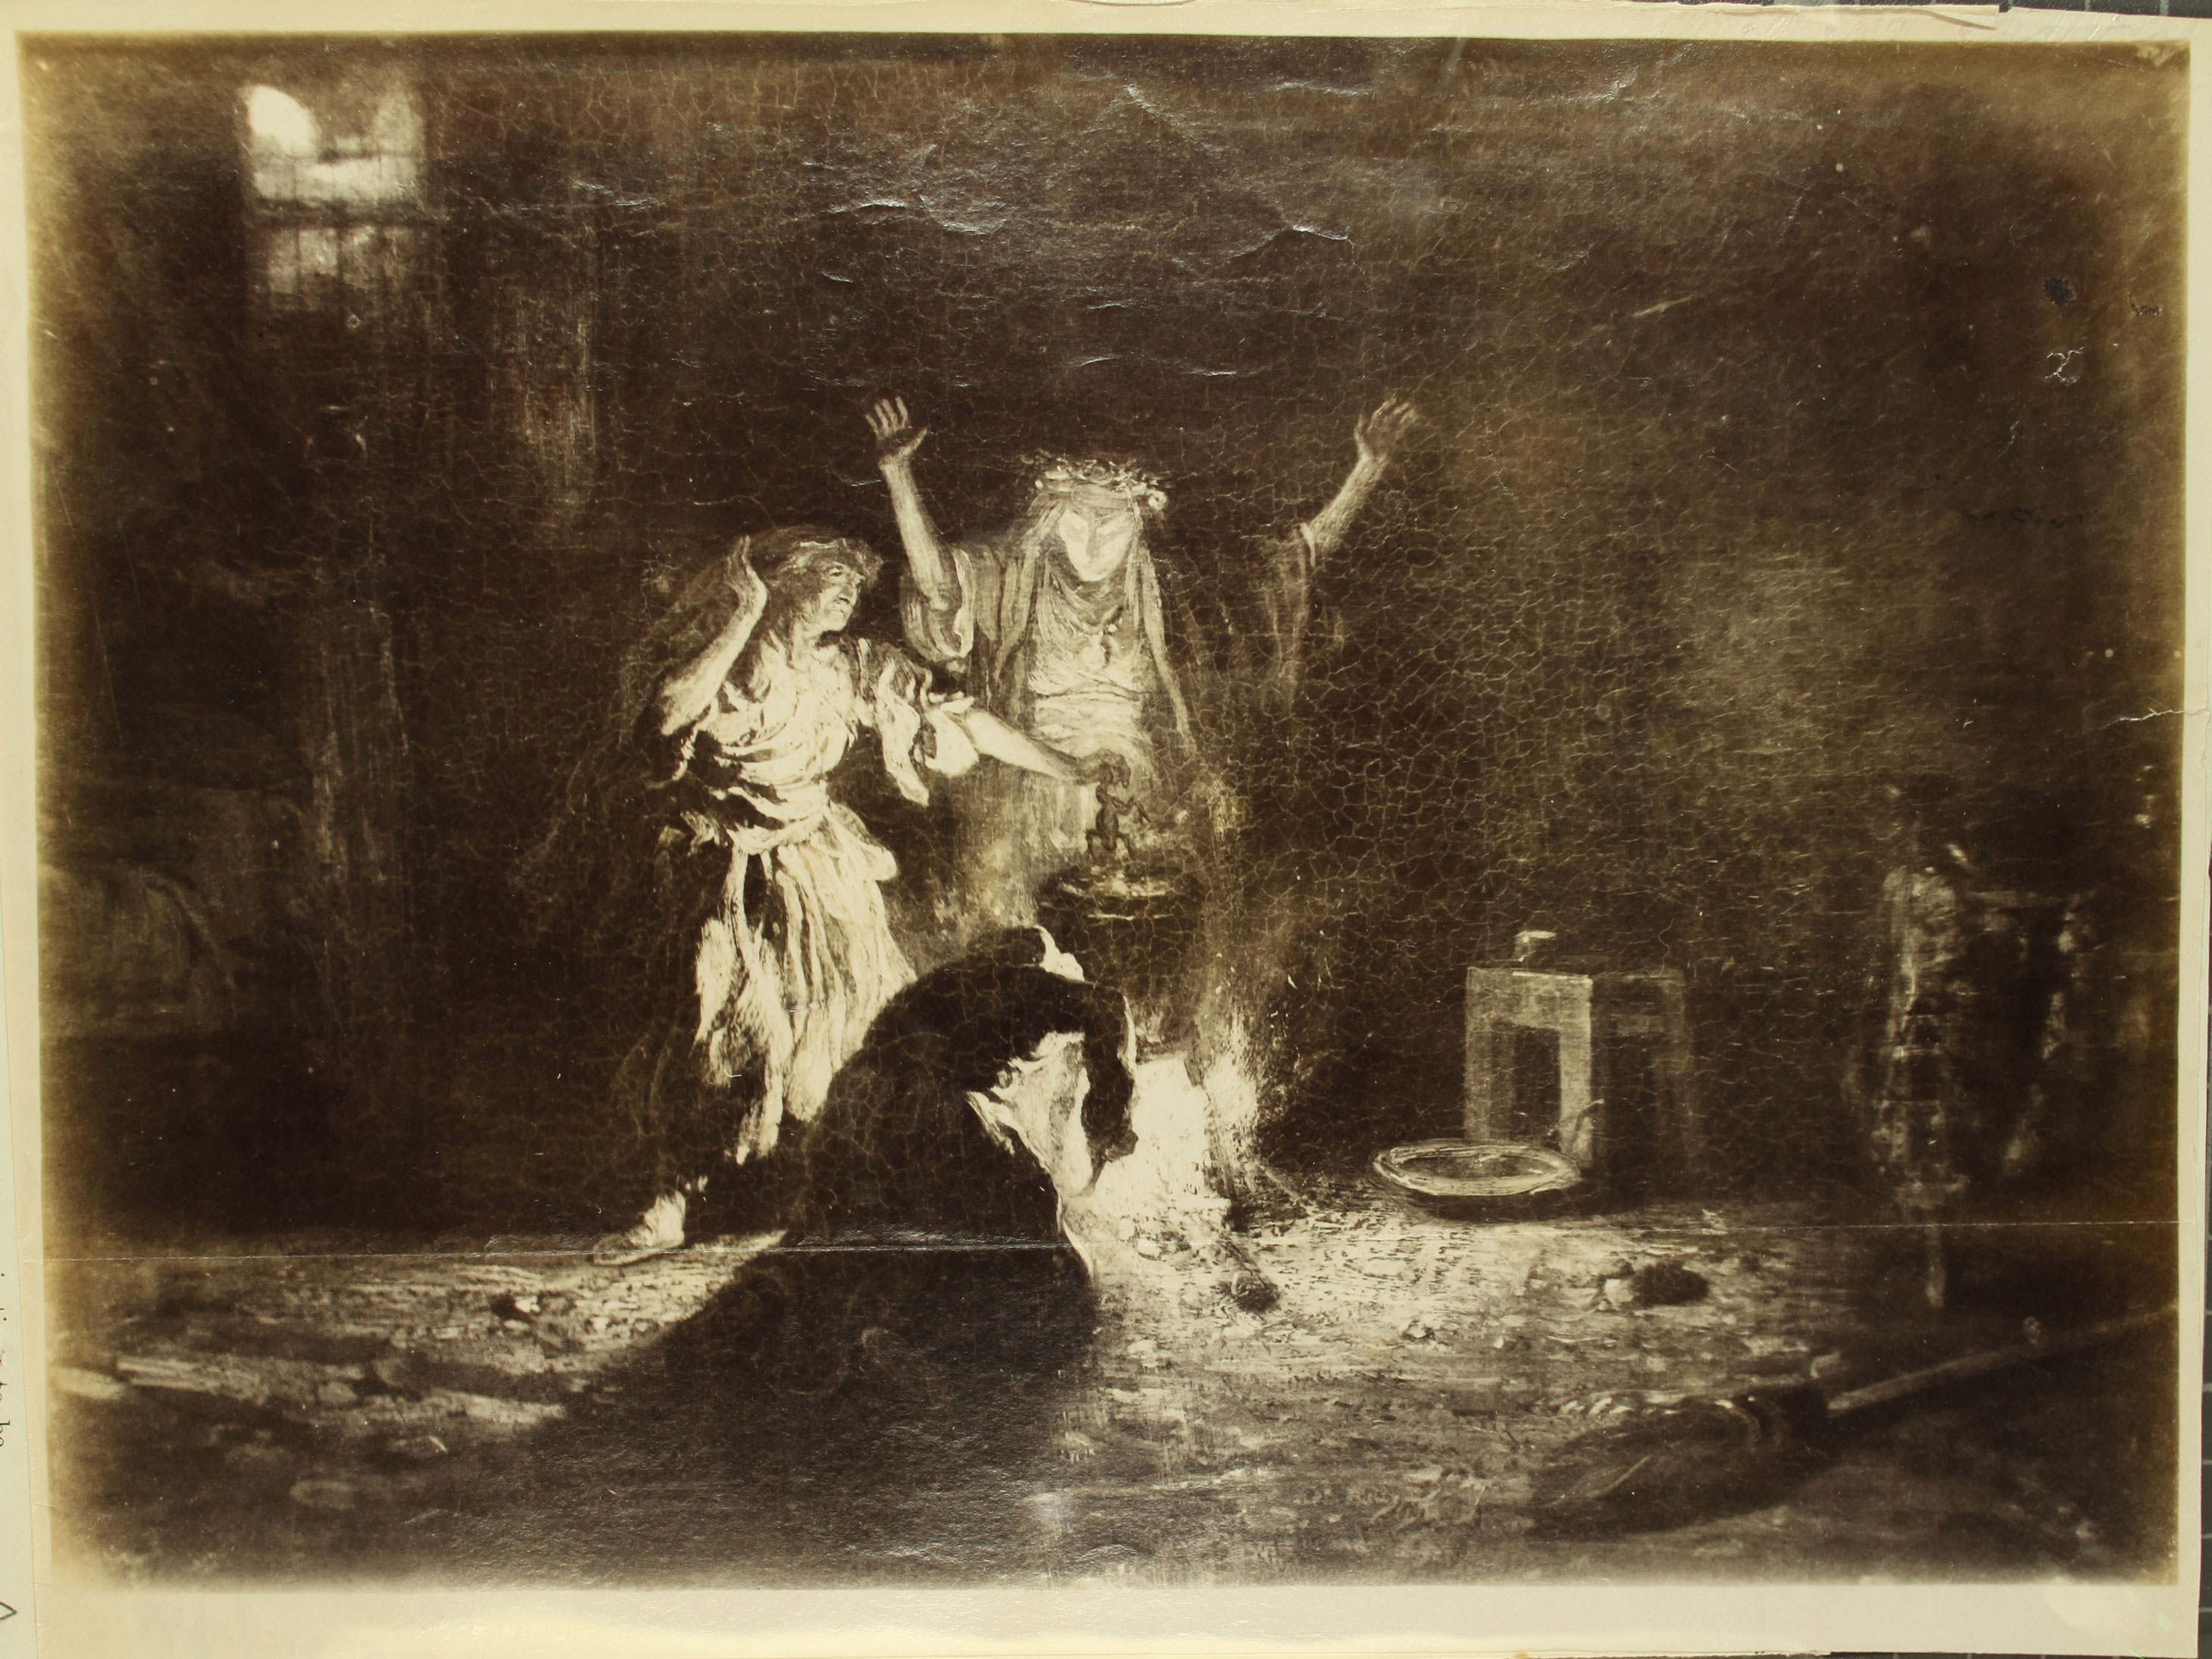 Three witches stand around a boiling pot. One stirs the pot, one stokes the fire, and one lifts her hands while looking into it.